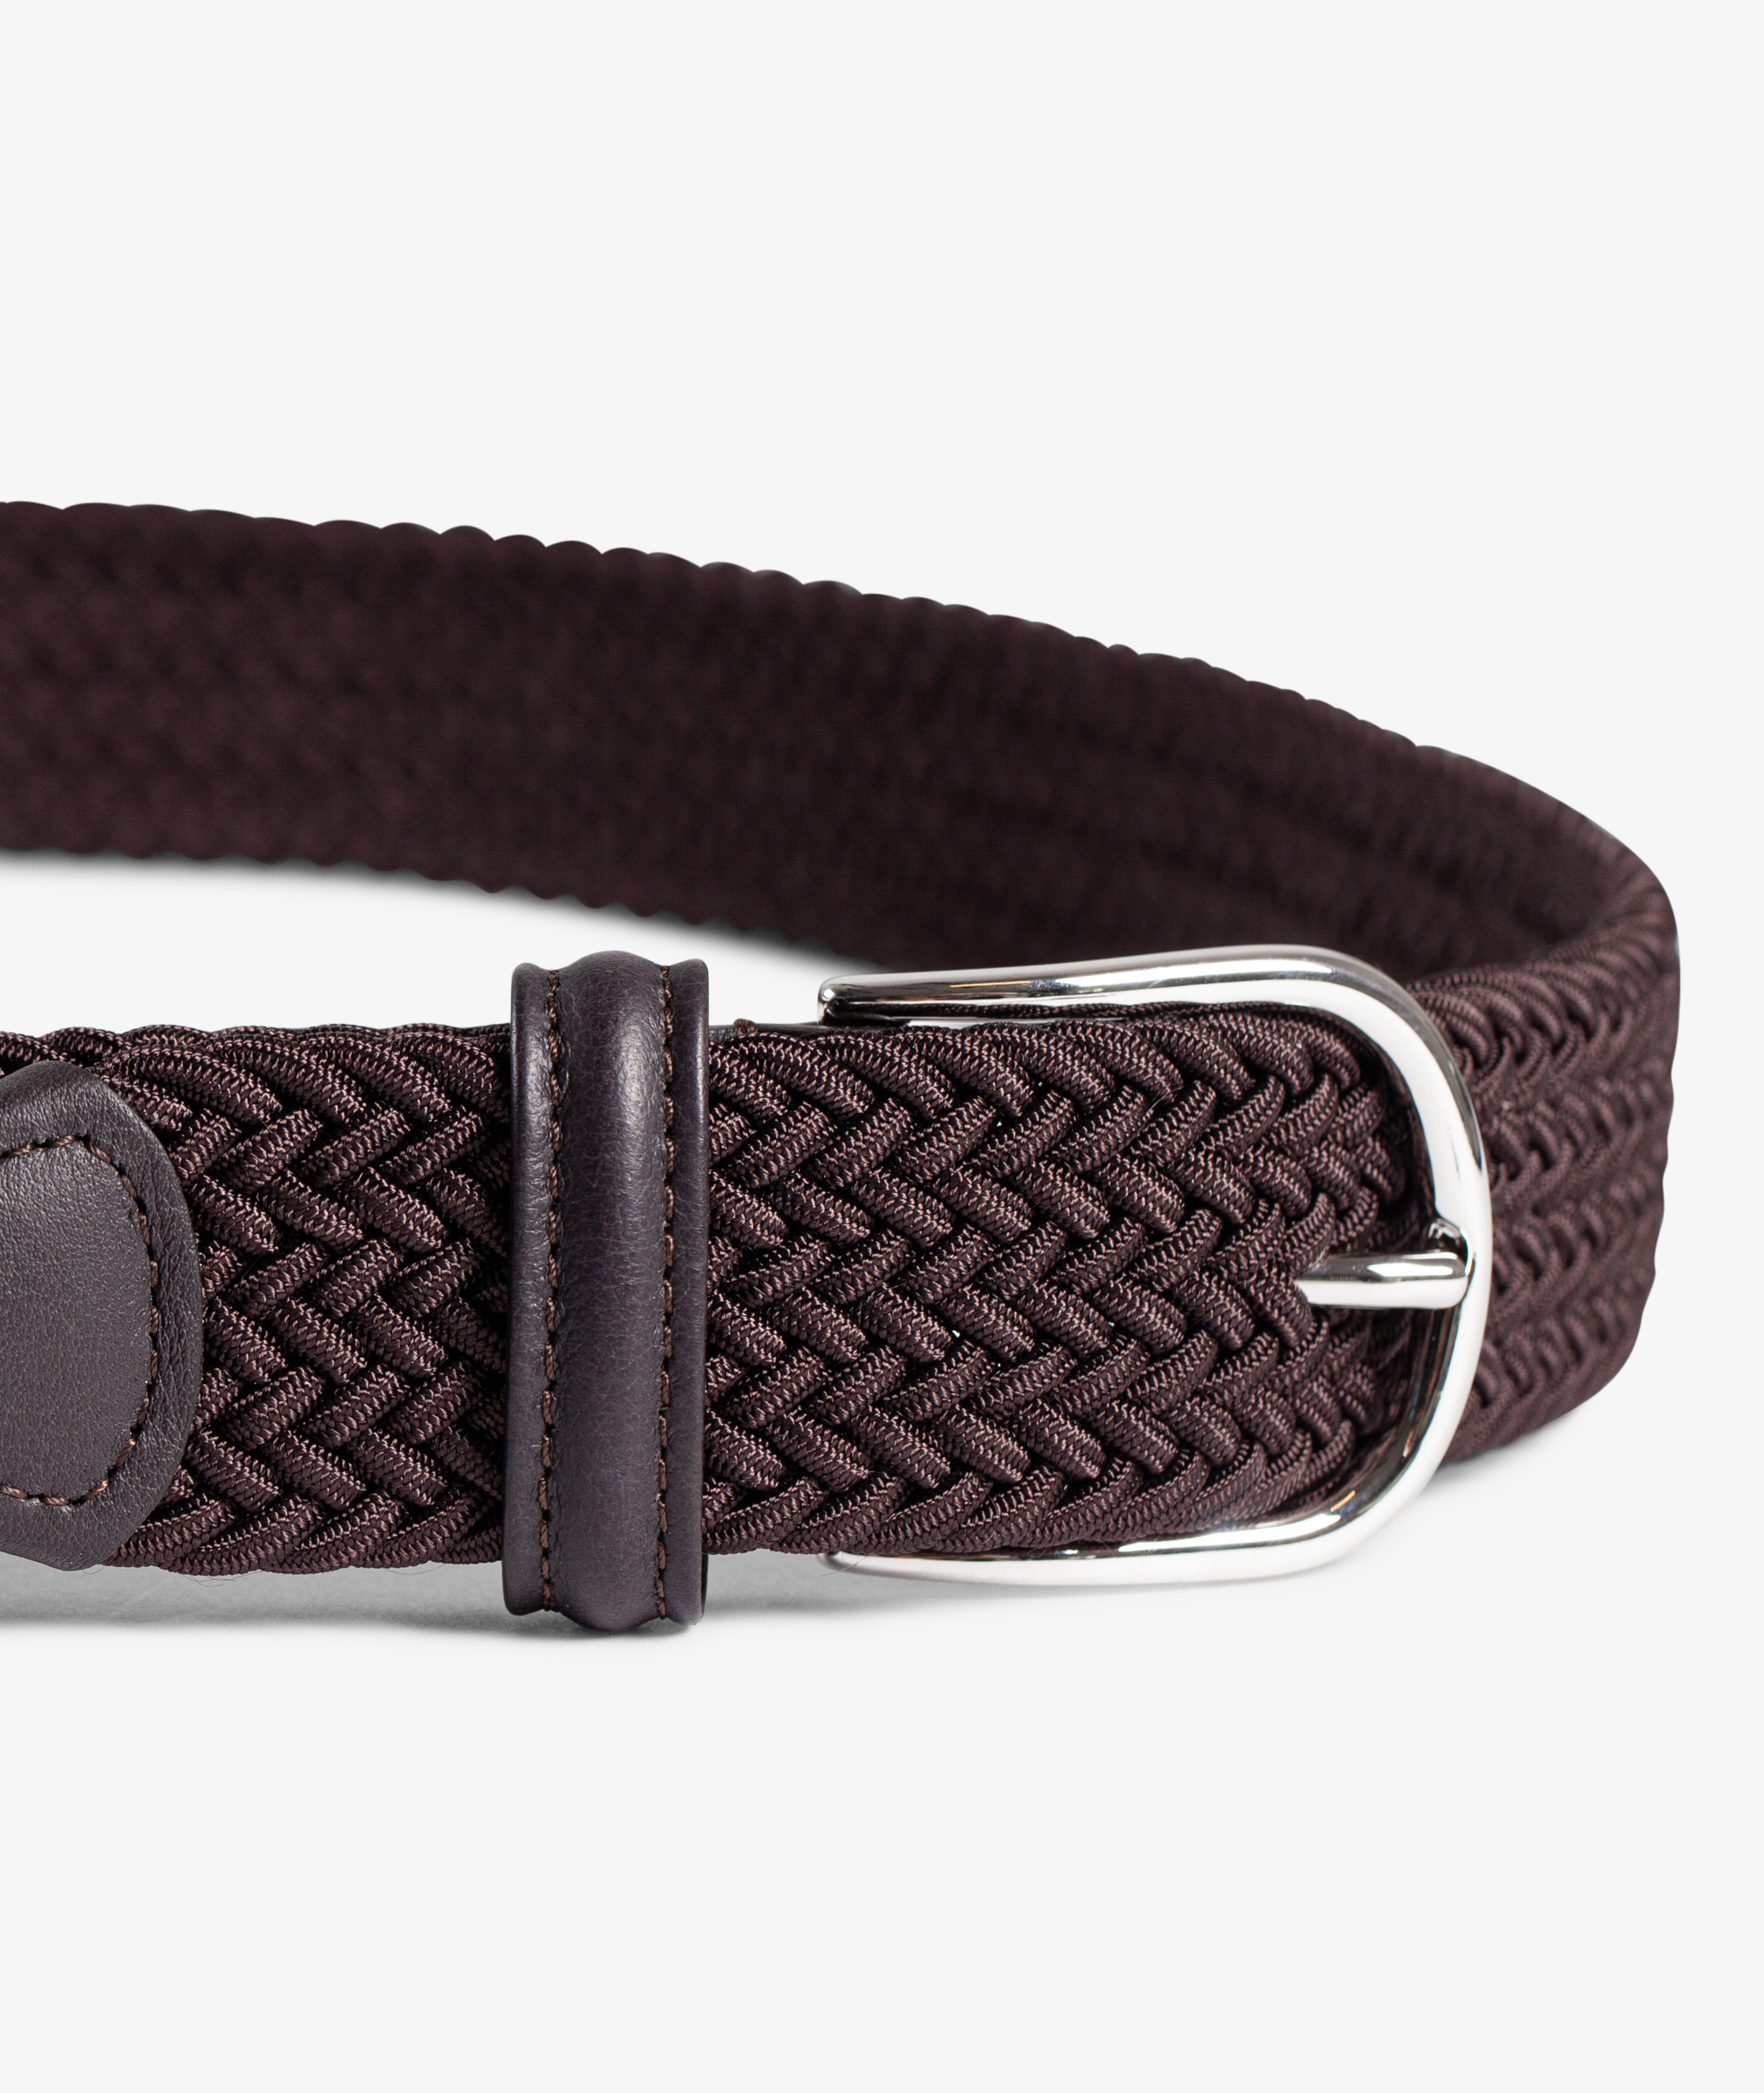 Norse Store  Shipping Worldwide - Anderson's Buckled Leather Belt - Black